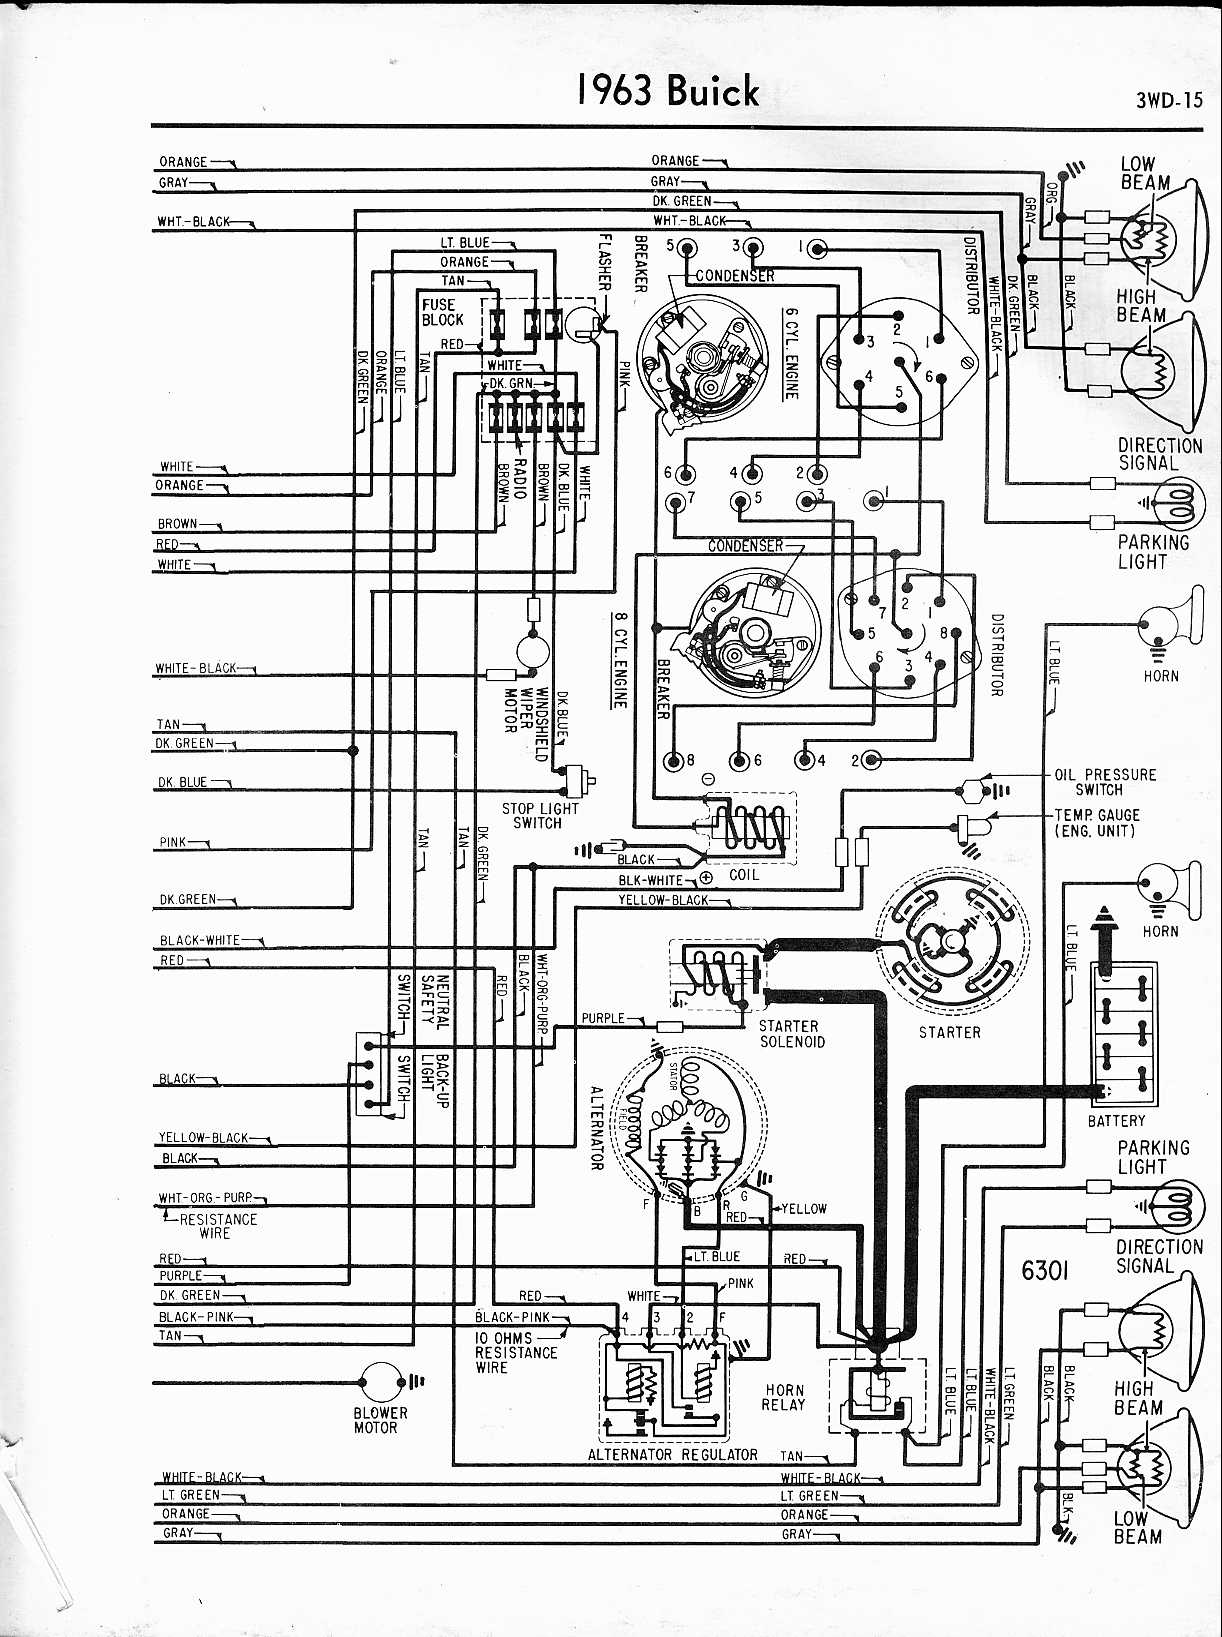 DOWNLOAD [DIAGRAM] 1977 Buick Electra Wiring Diagram Full Quality